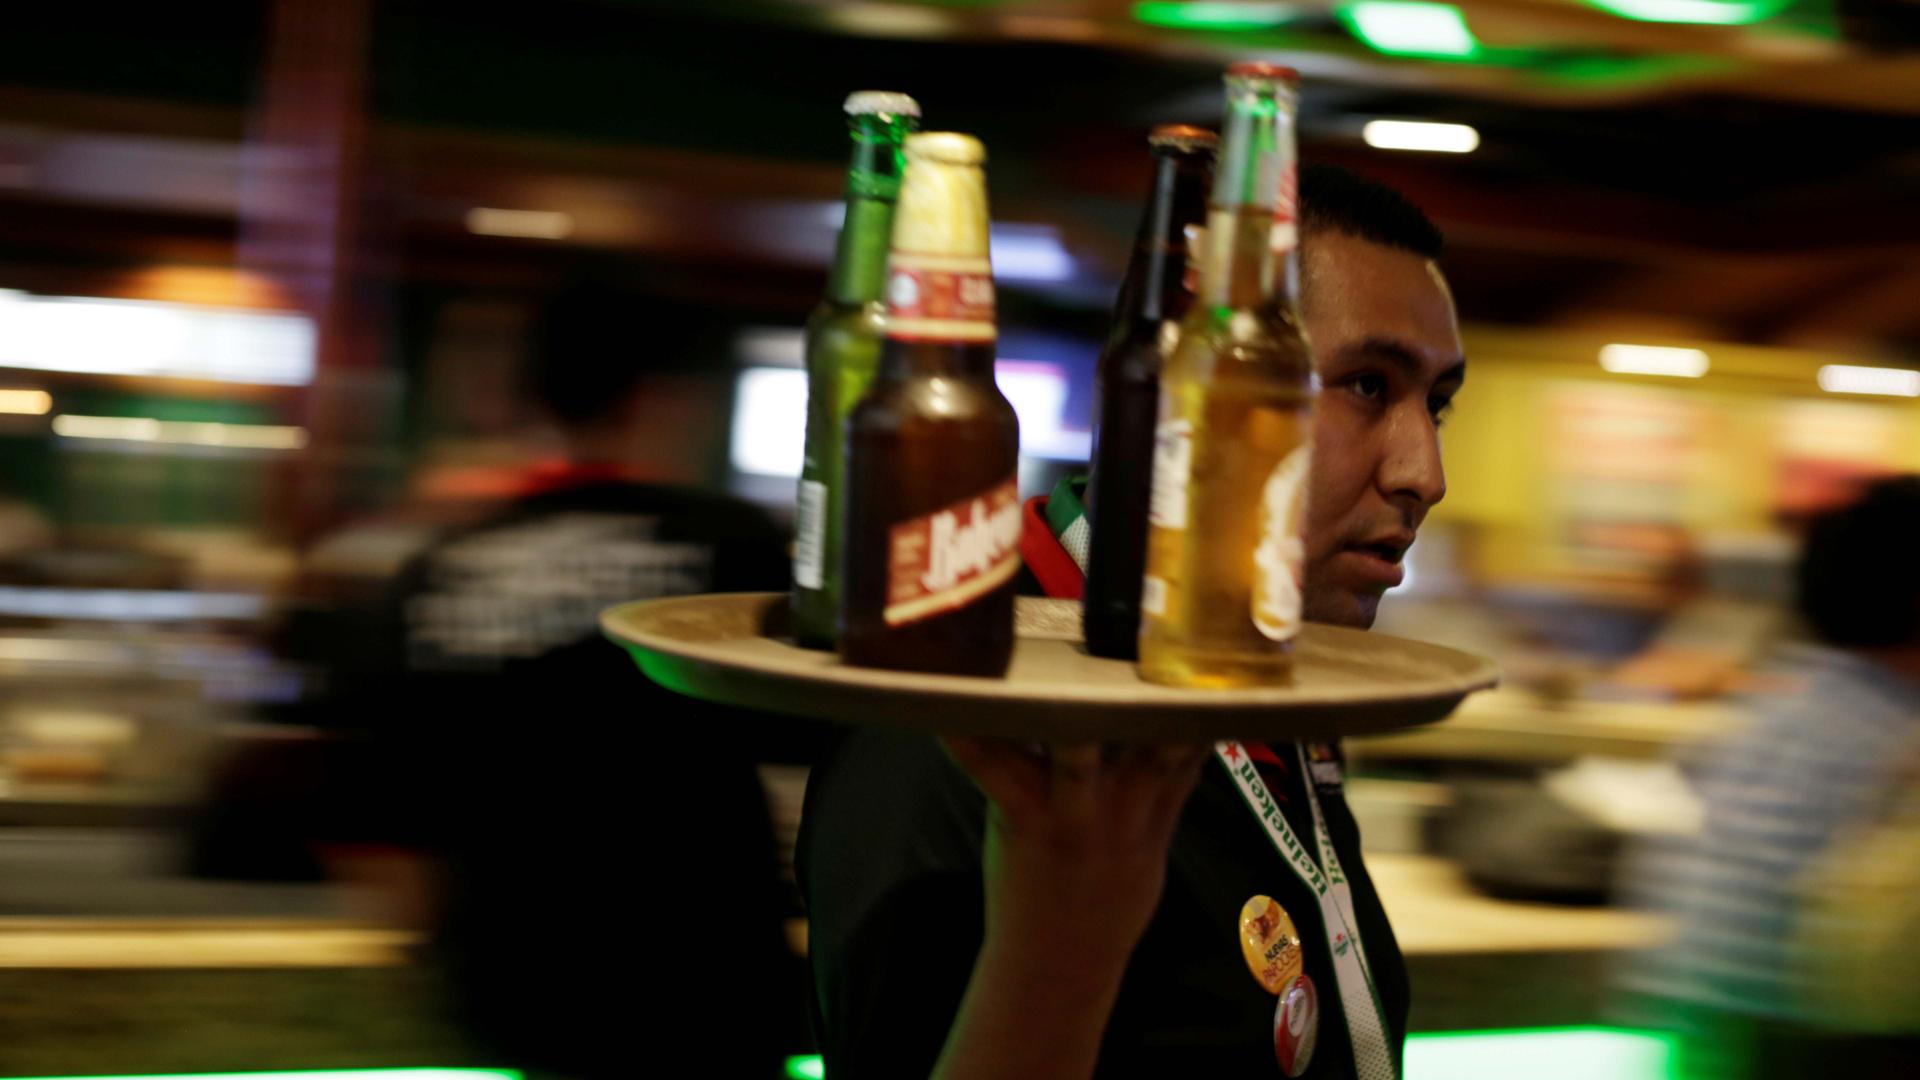 A waiter carries a round tray with bottles of Mexican beer at a bar in Ciudad Juarez, Mexico, on June 20, 2017.